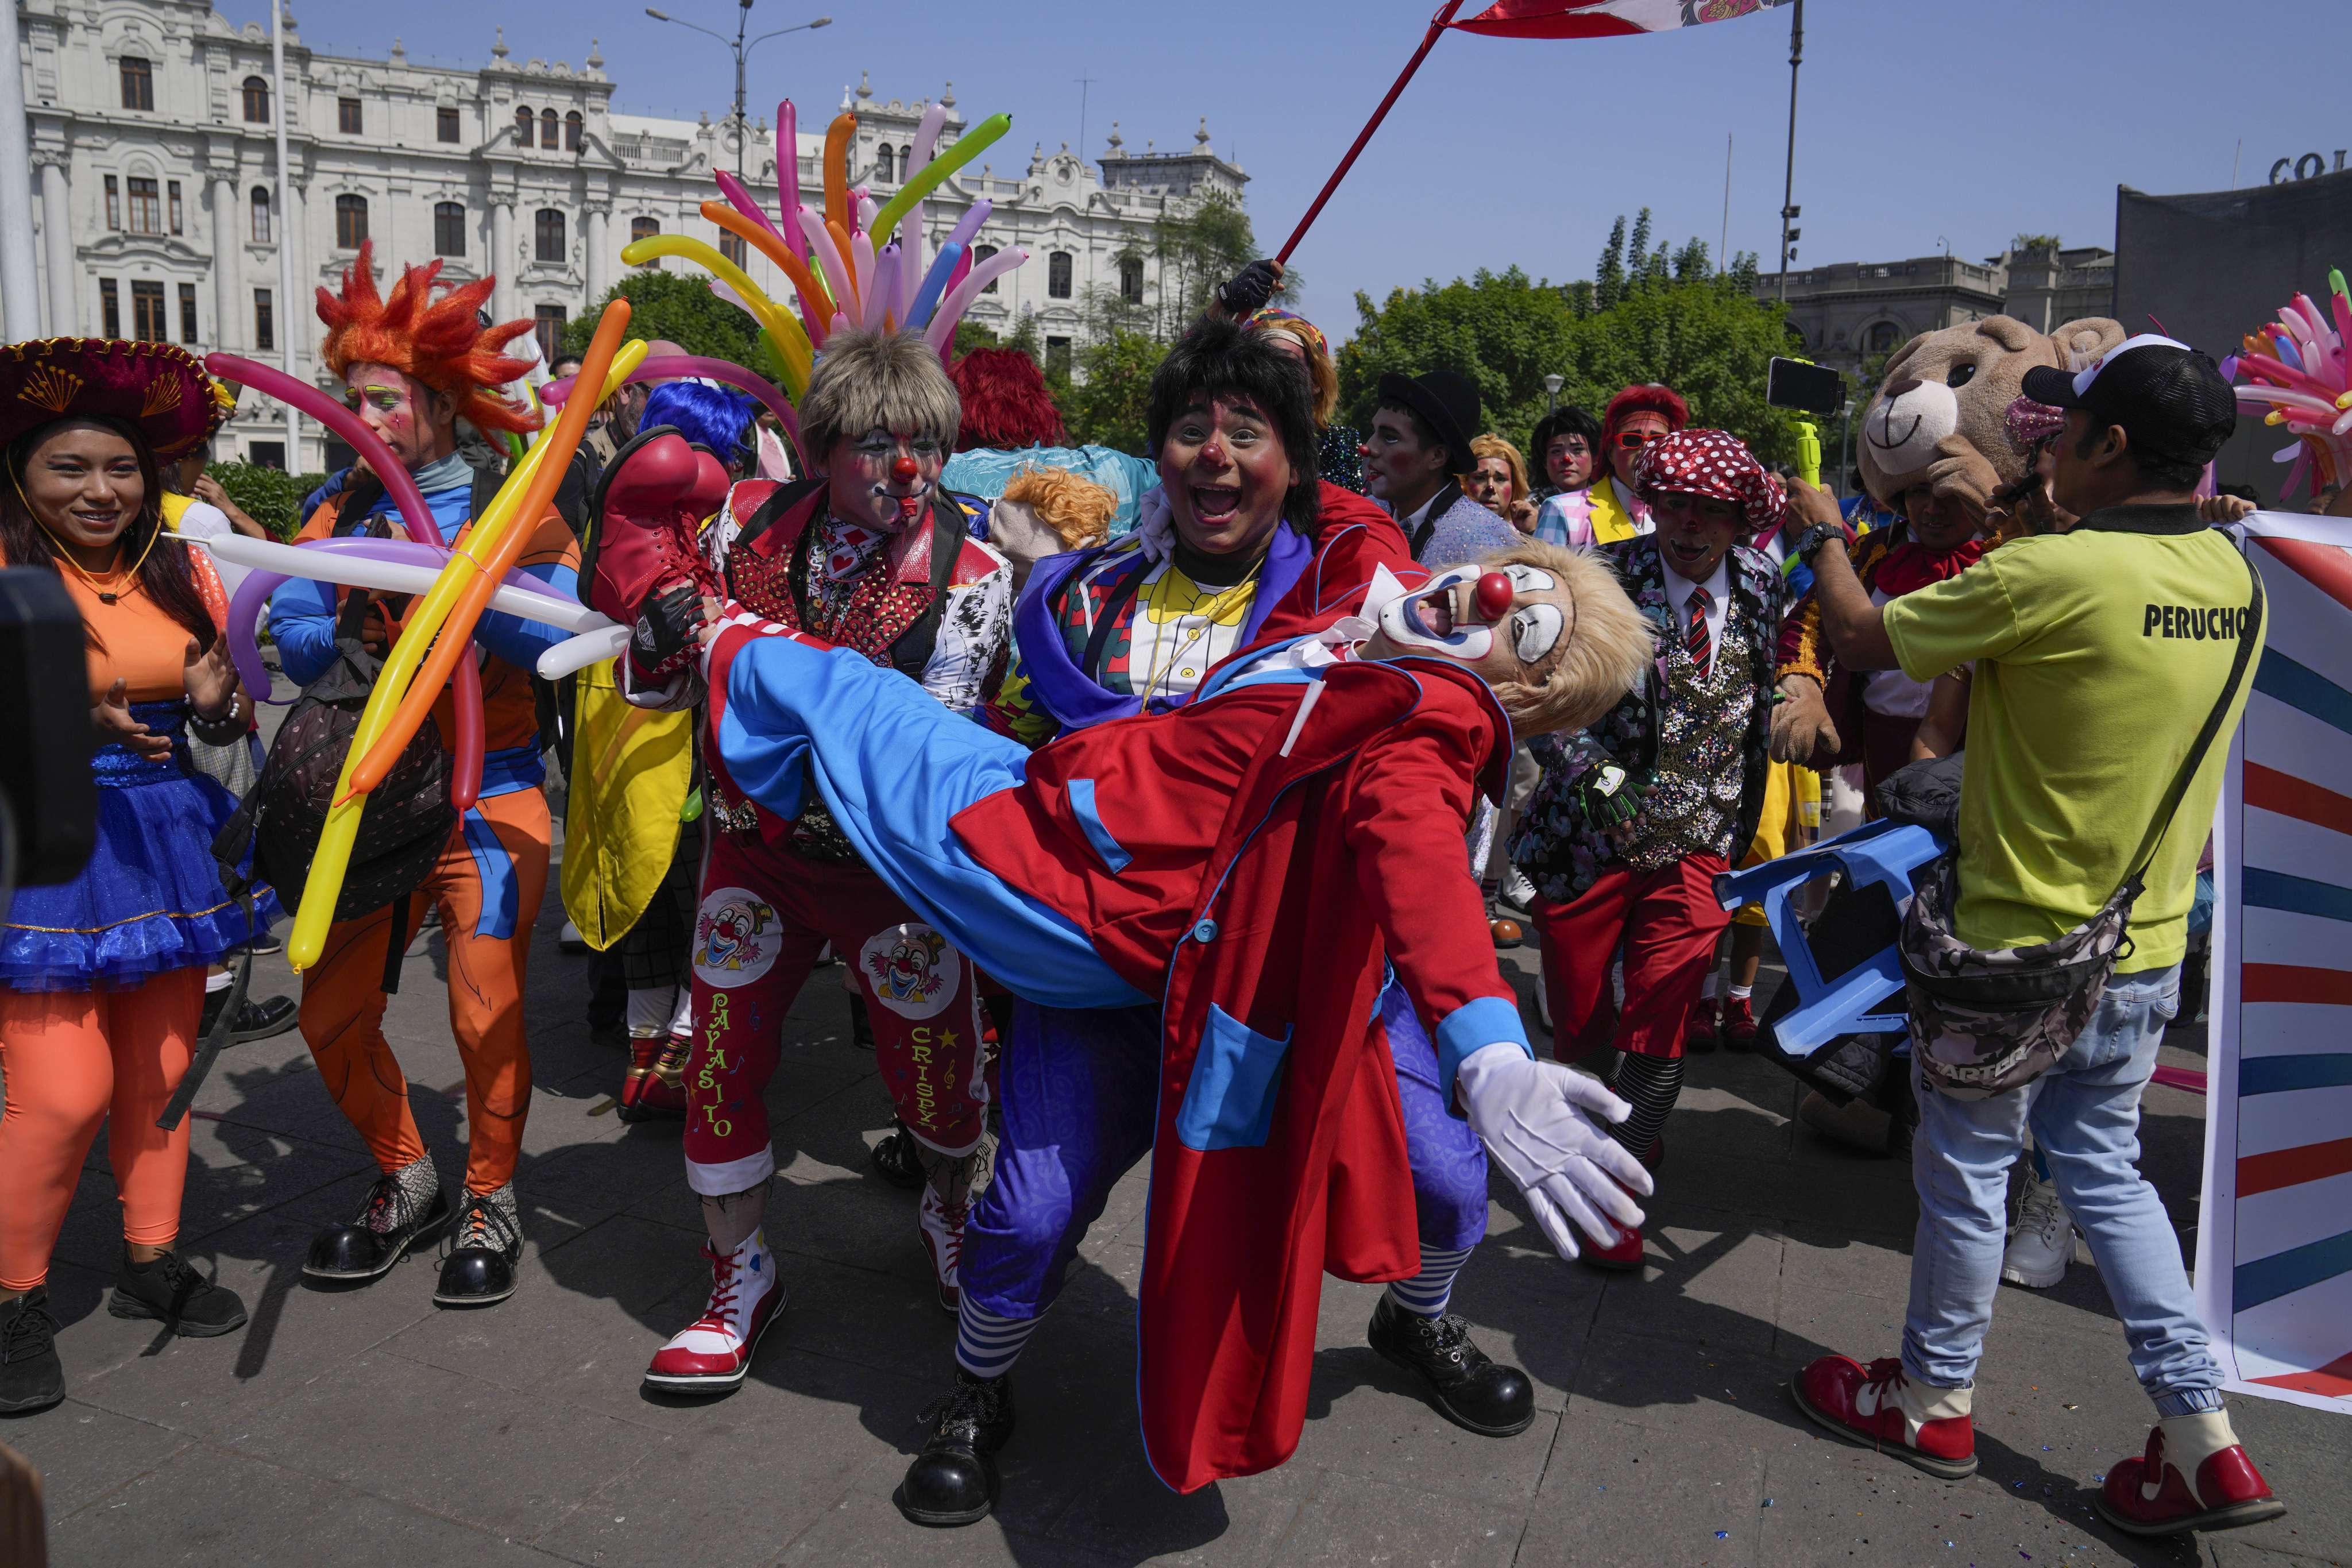 Professional clowns gather annually to honour the beloved clown Tony Perejil who died on May 25, 1987, and was known as “the clown of the poor” because he performed in low-income neighbourhoods. Photo: AP